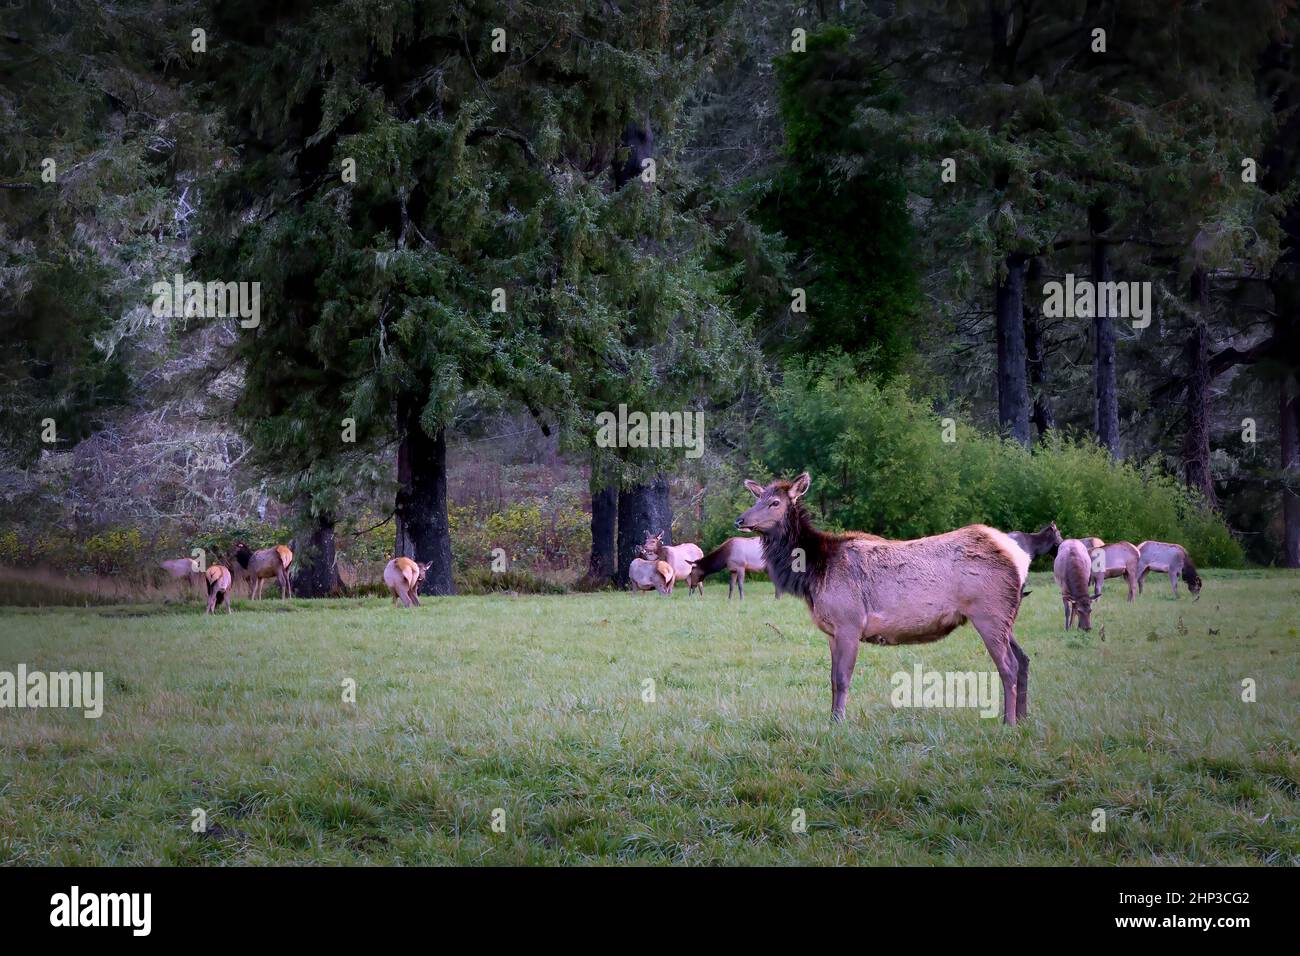 A herd of Elk grazes in a field near a forest in northern California. Stock Photo